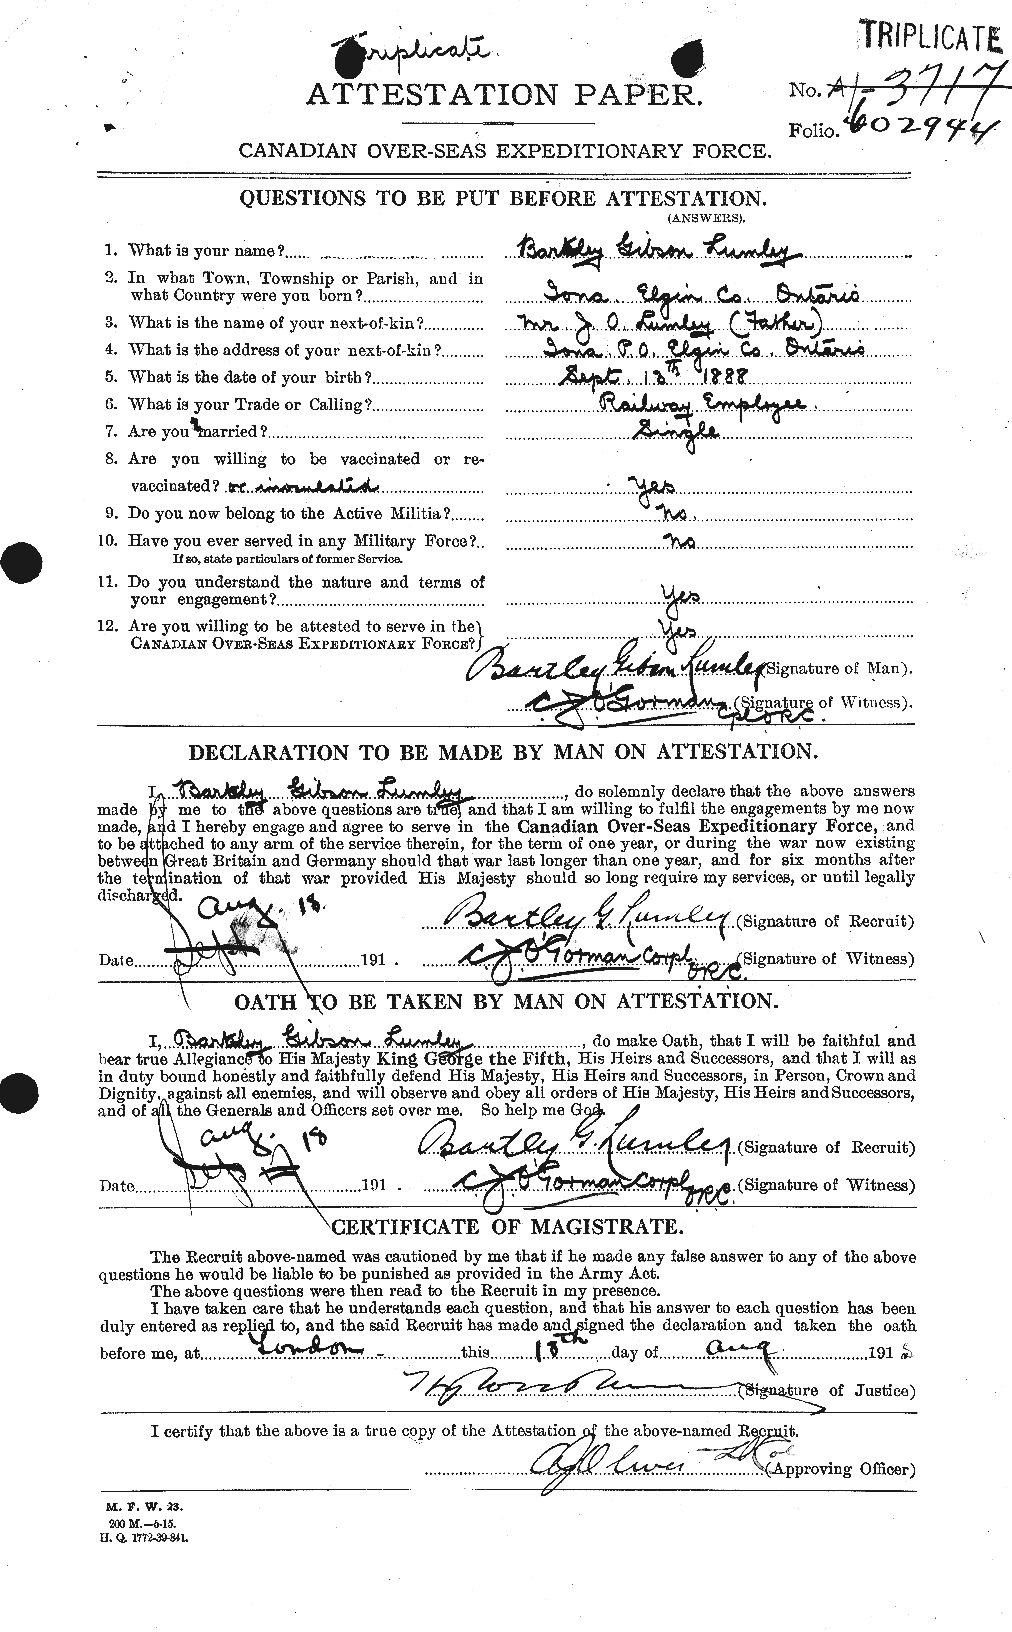 Personnel Records of the First World War - CEF 470799a